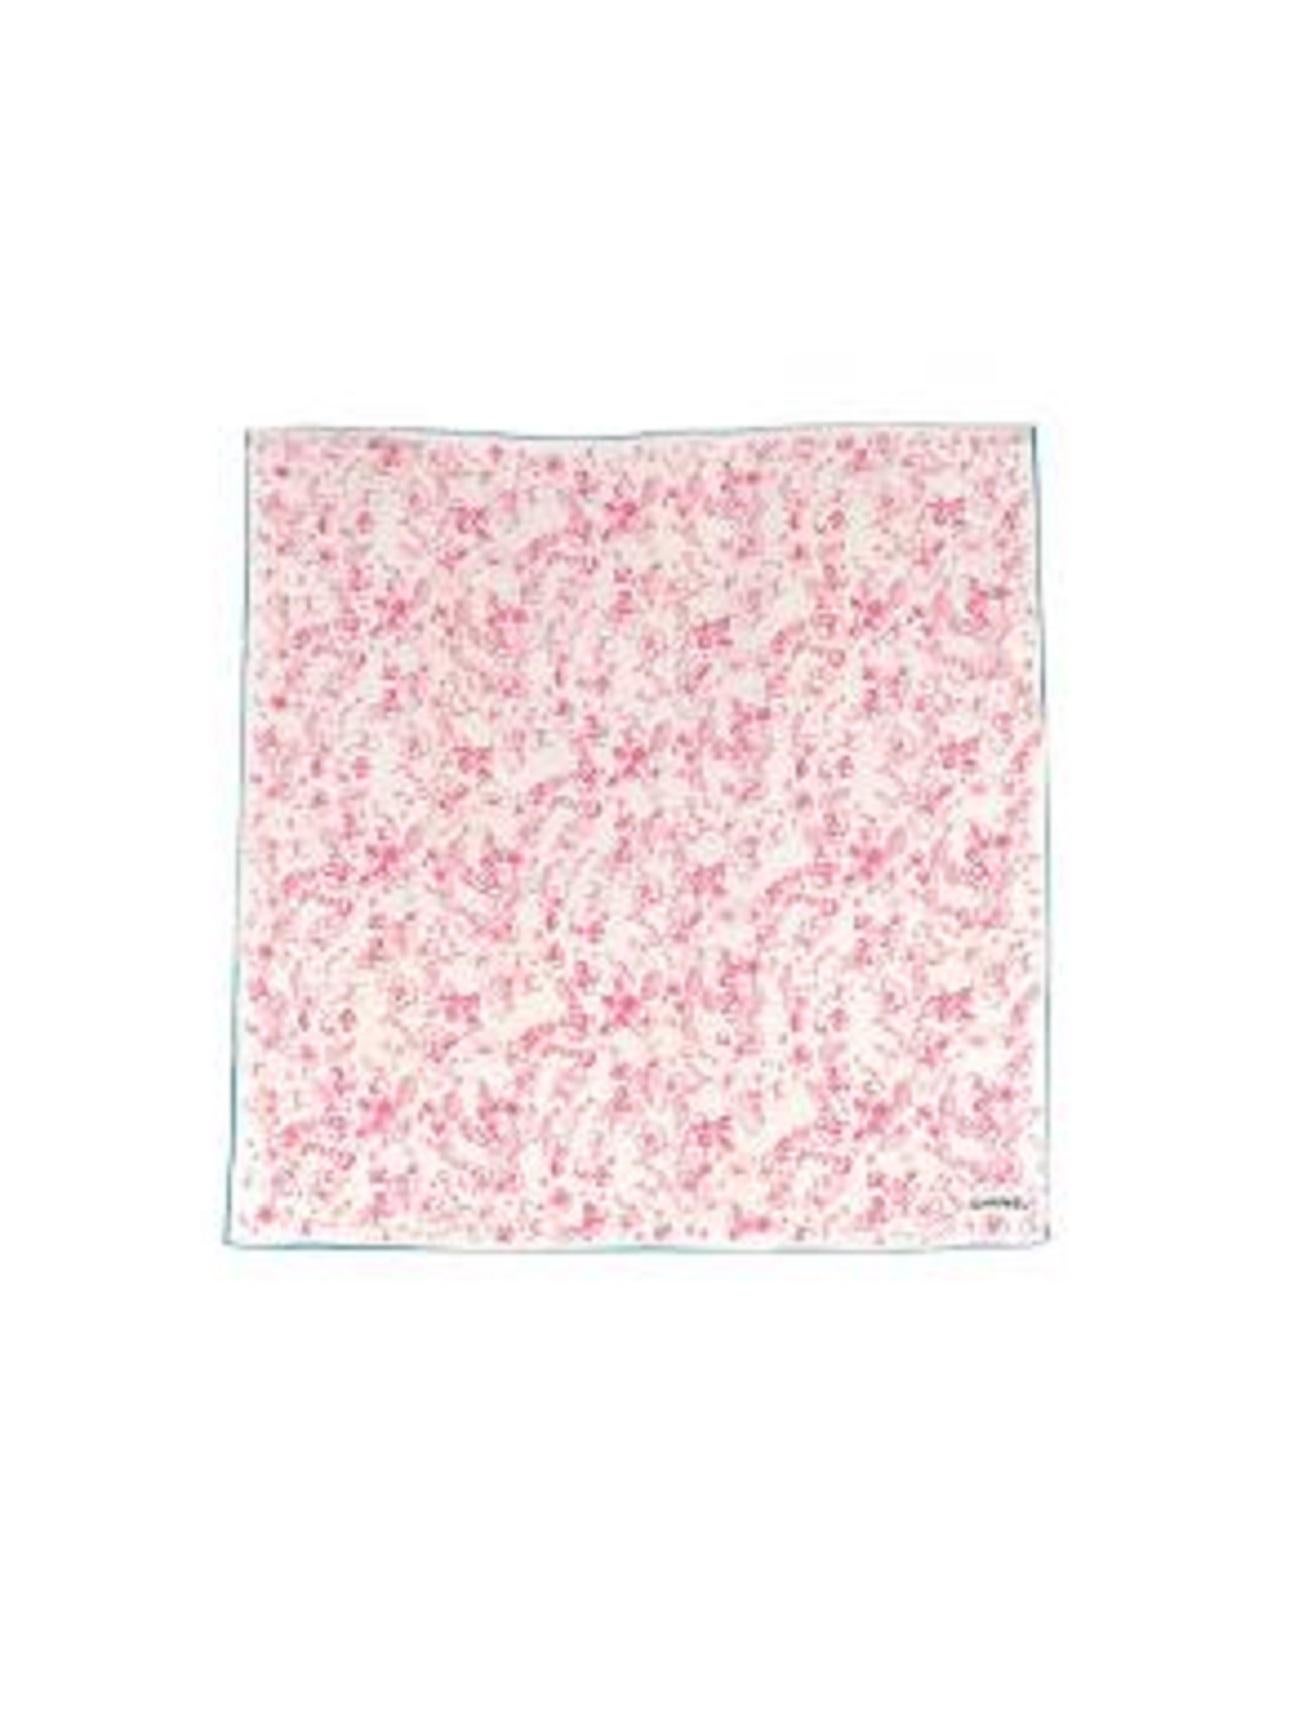 Chanel Cream & Pink CC Floral Scarf 

-Pink floral pattern with bows, floral and chanel logos
-Cream background and turquoise border 
-Square 
-'CHANEL' lettering right bottom corner in bold black letters

Material
-Silk

Washing
-Dry clean only